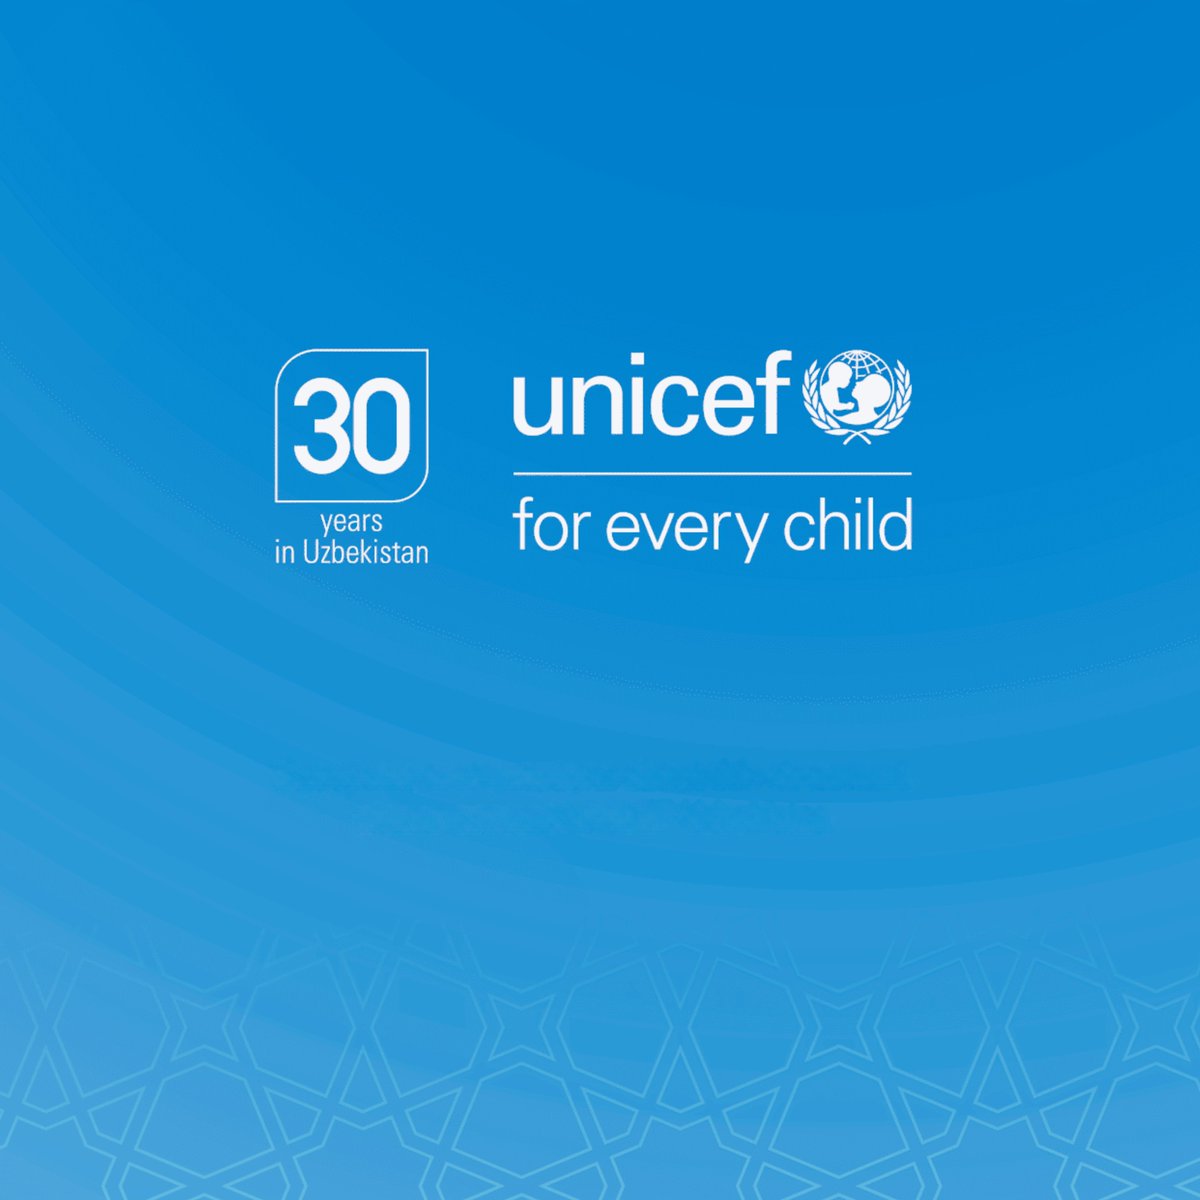 This year marks an important year for children in Uzbekistan 🇺🇿. This year, the country celebrates #30years since UNICEF officially opened its Representative Office in #UZB. In 30 years, the country has made significant progress to advance the rights of the child. We work with